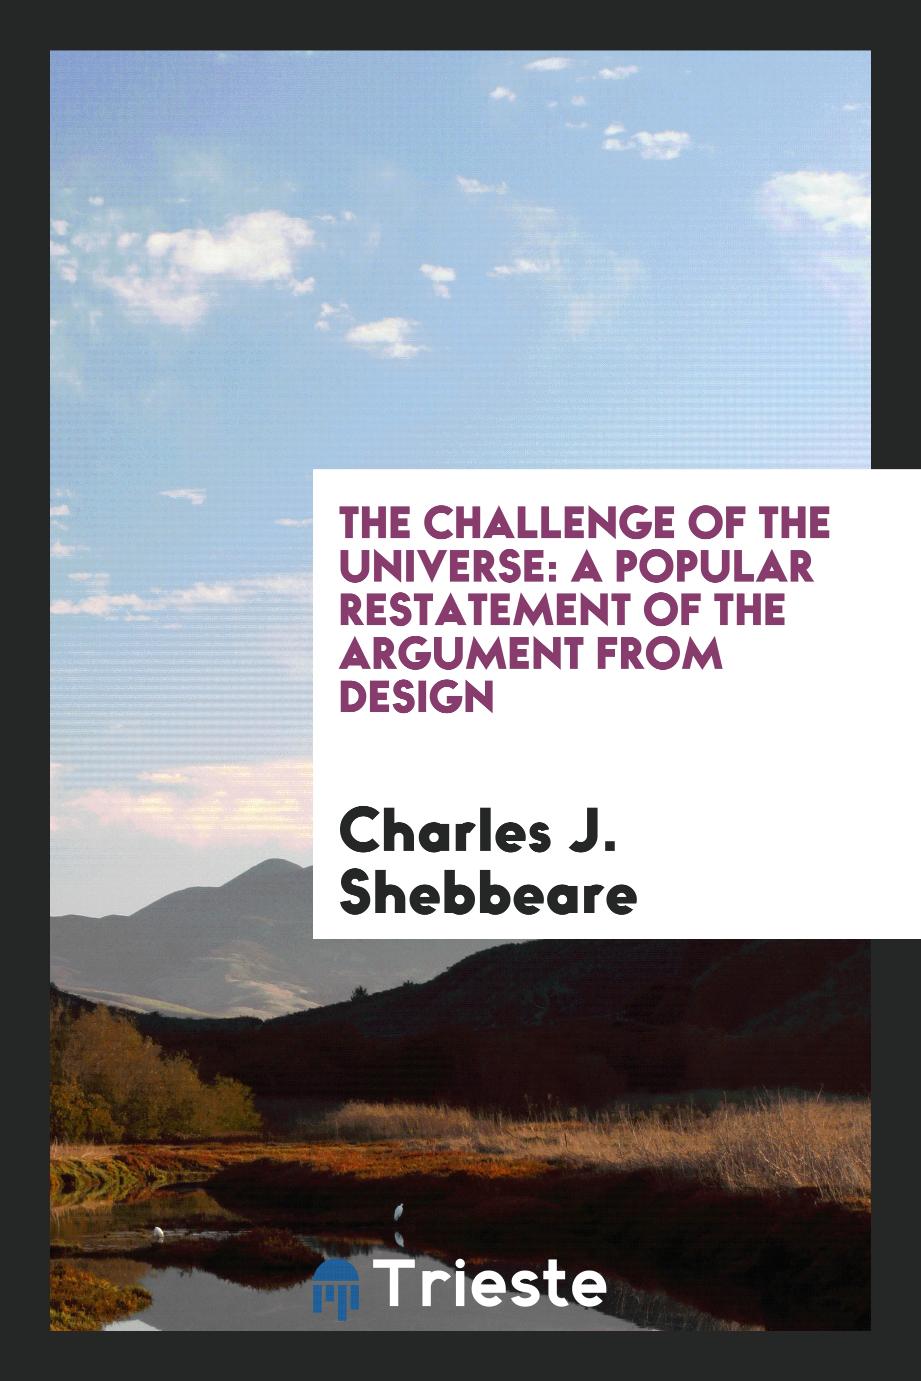 The challenge of the universe: a popular restatement of the argument from design